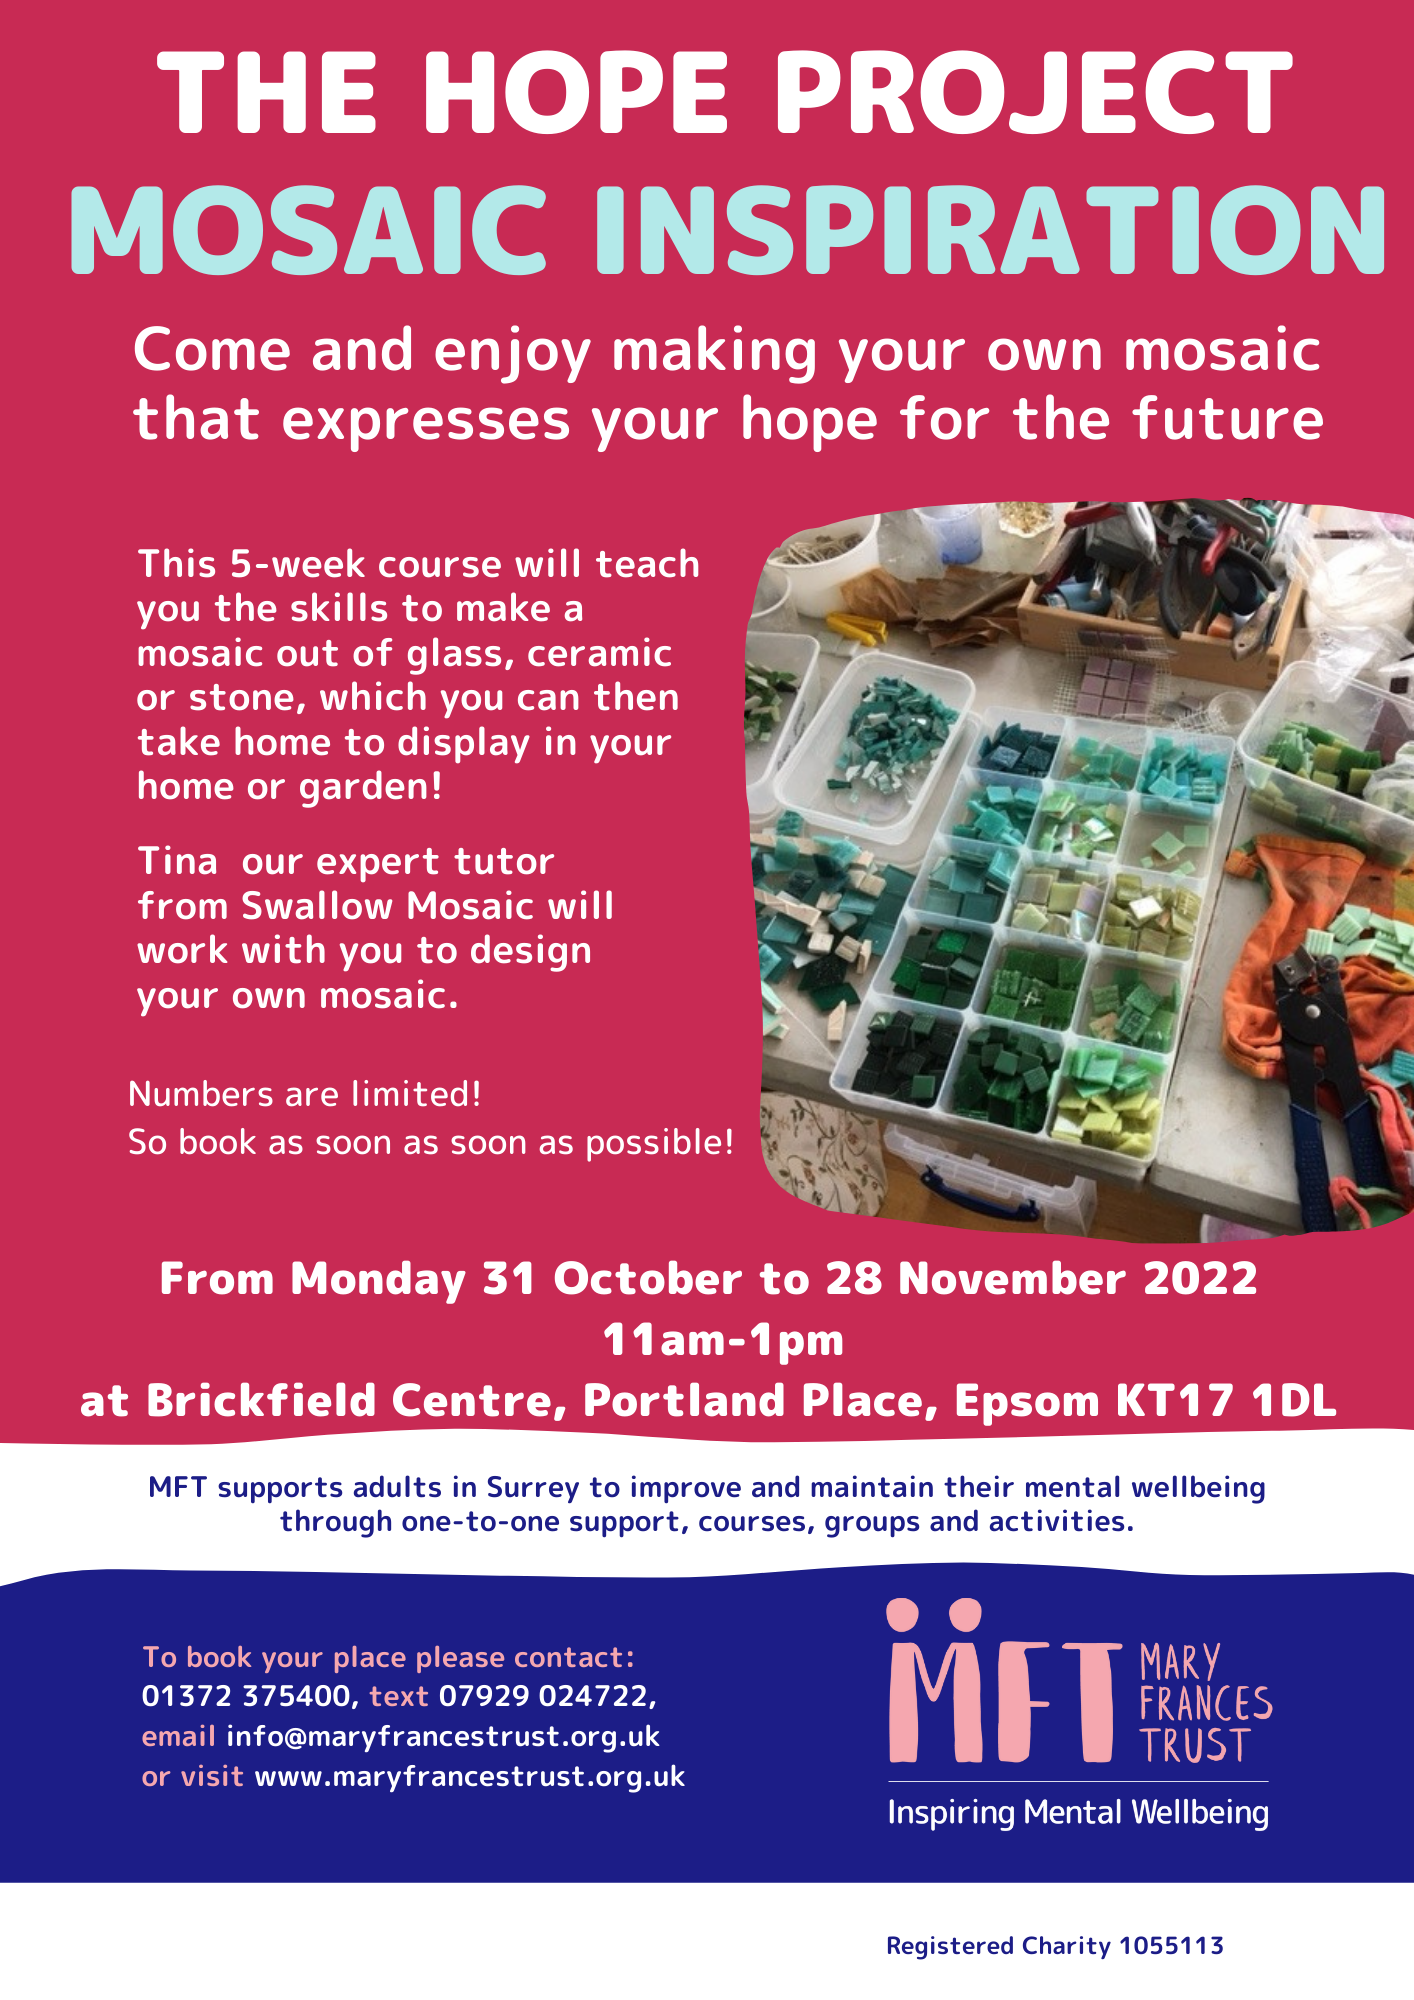 The Hope Project: Mosaic Inspiration workshop in Epsom